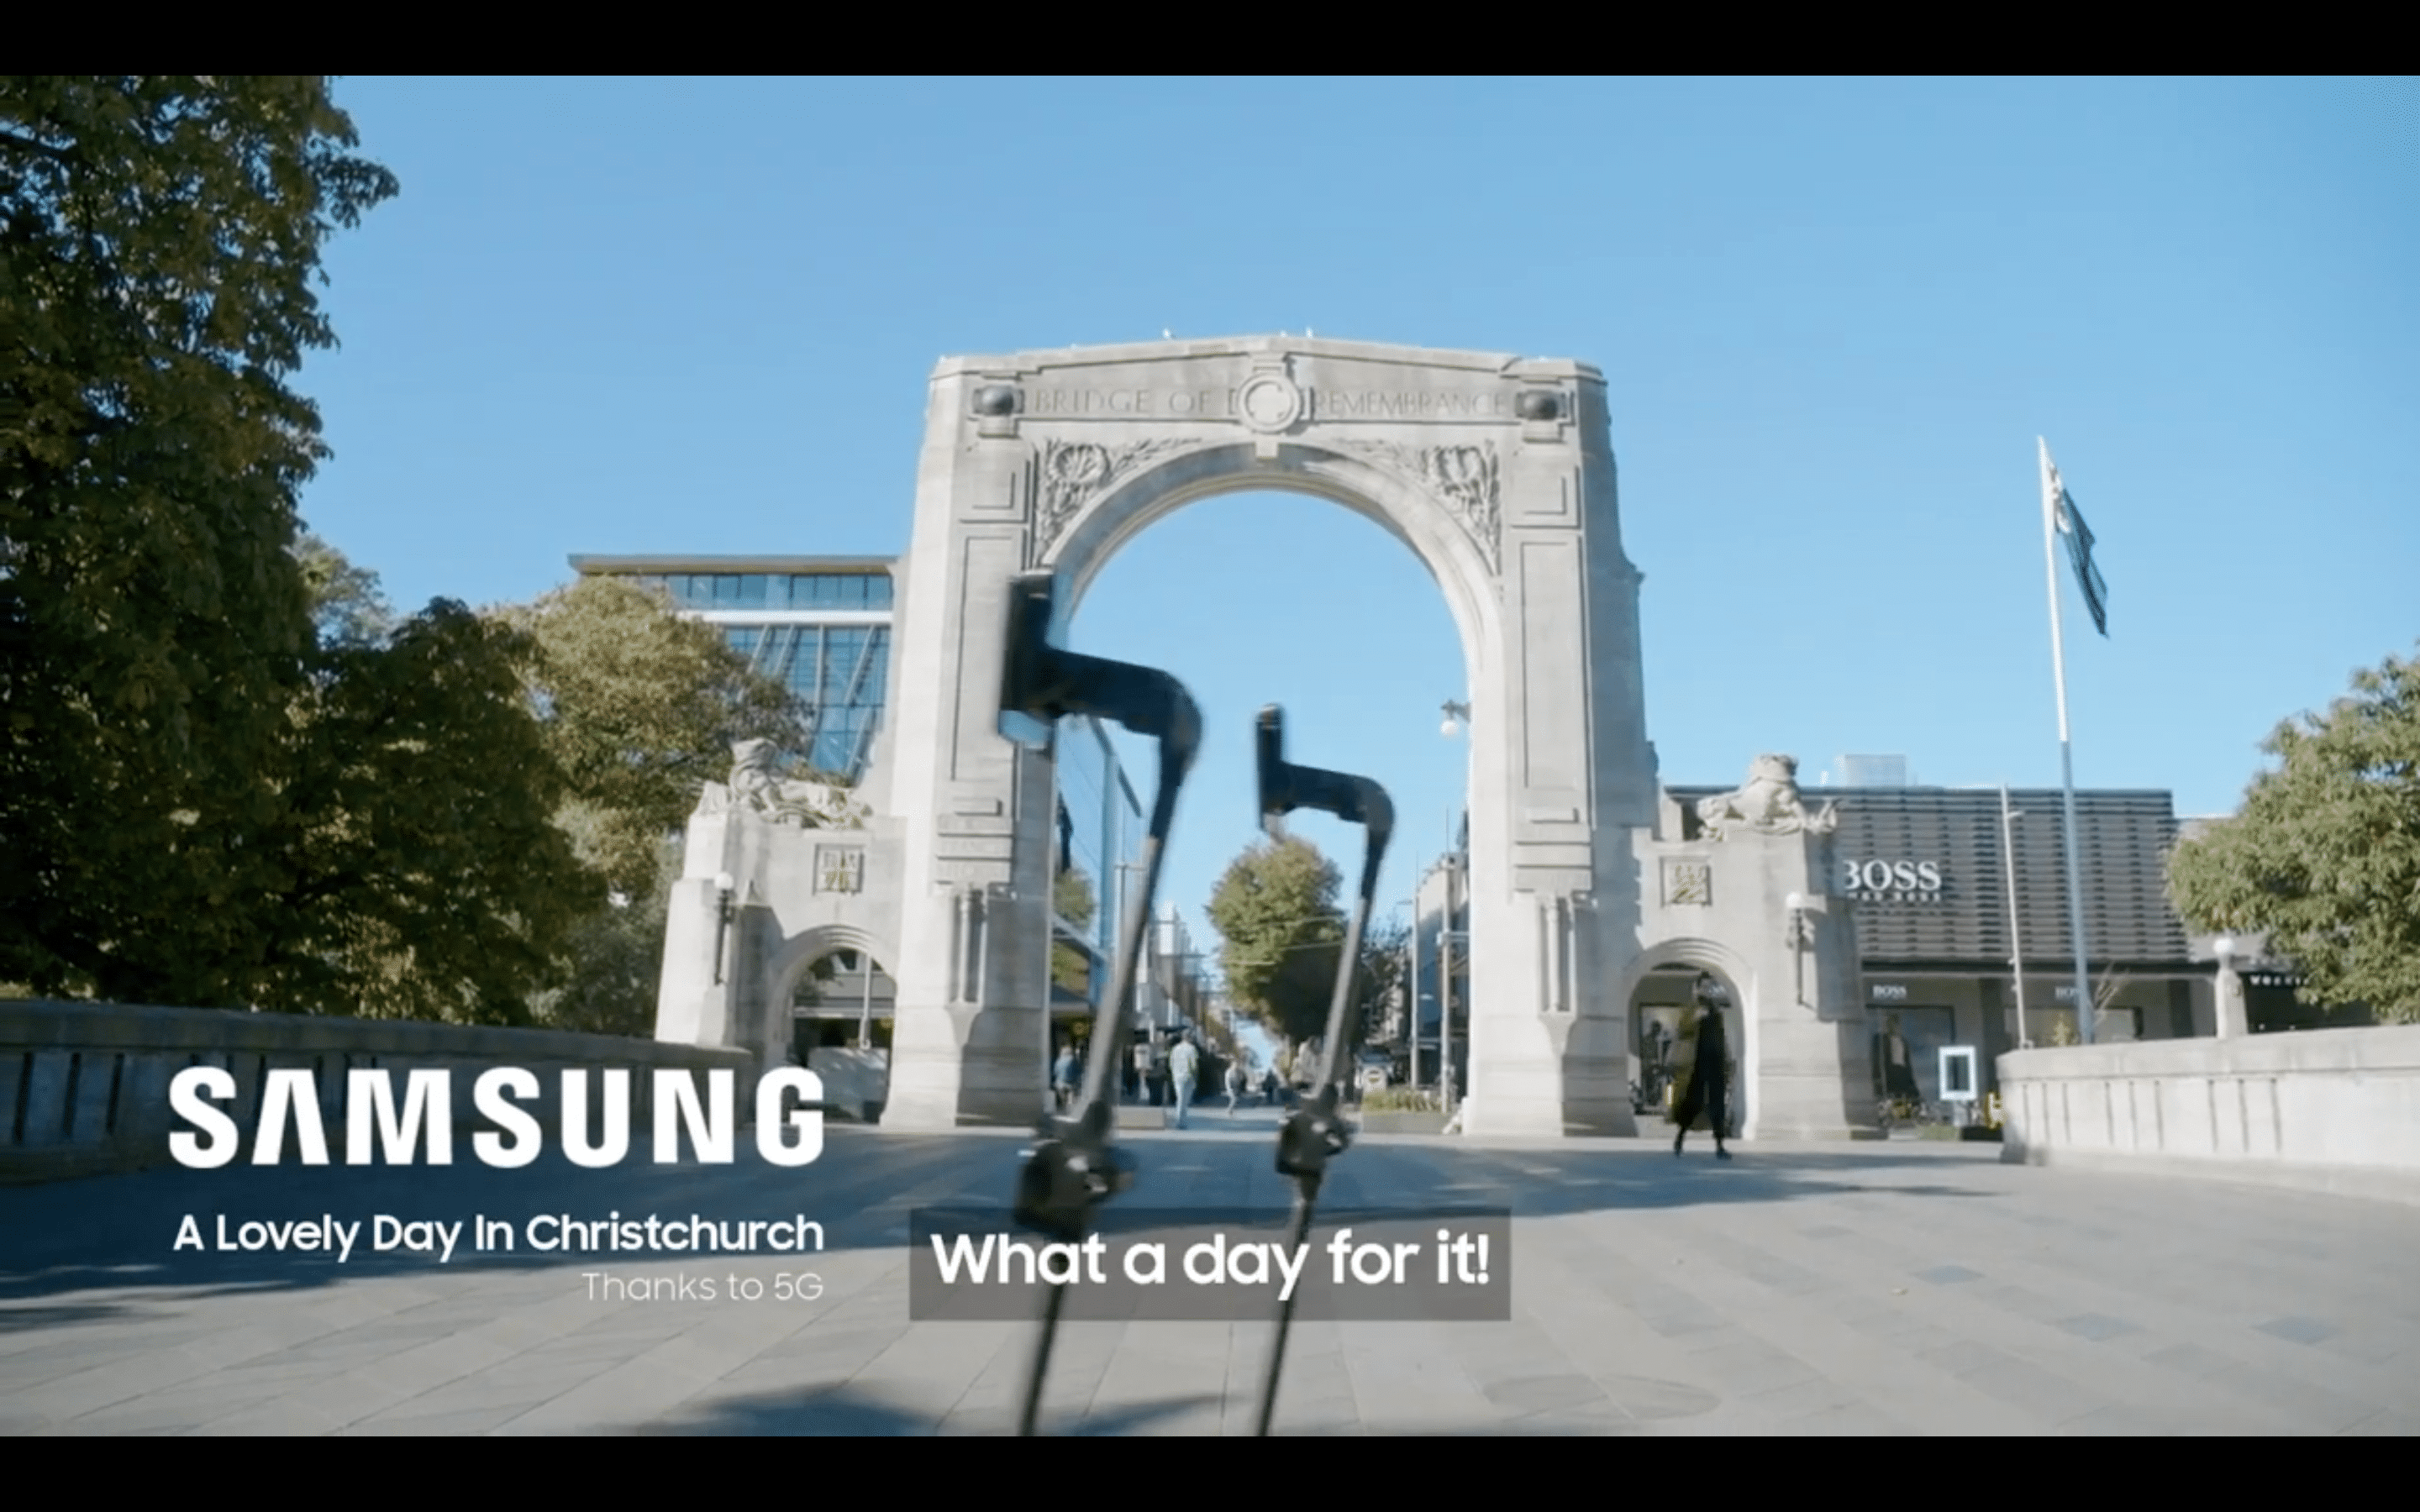 Samsung 5G Network Roll Out Christchurch - featuring Ohmni Robot